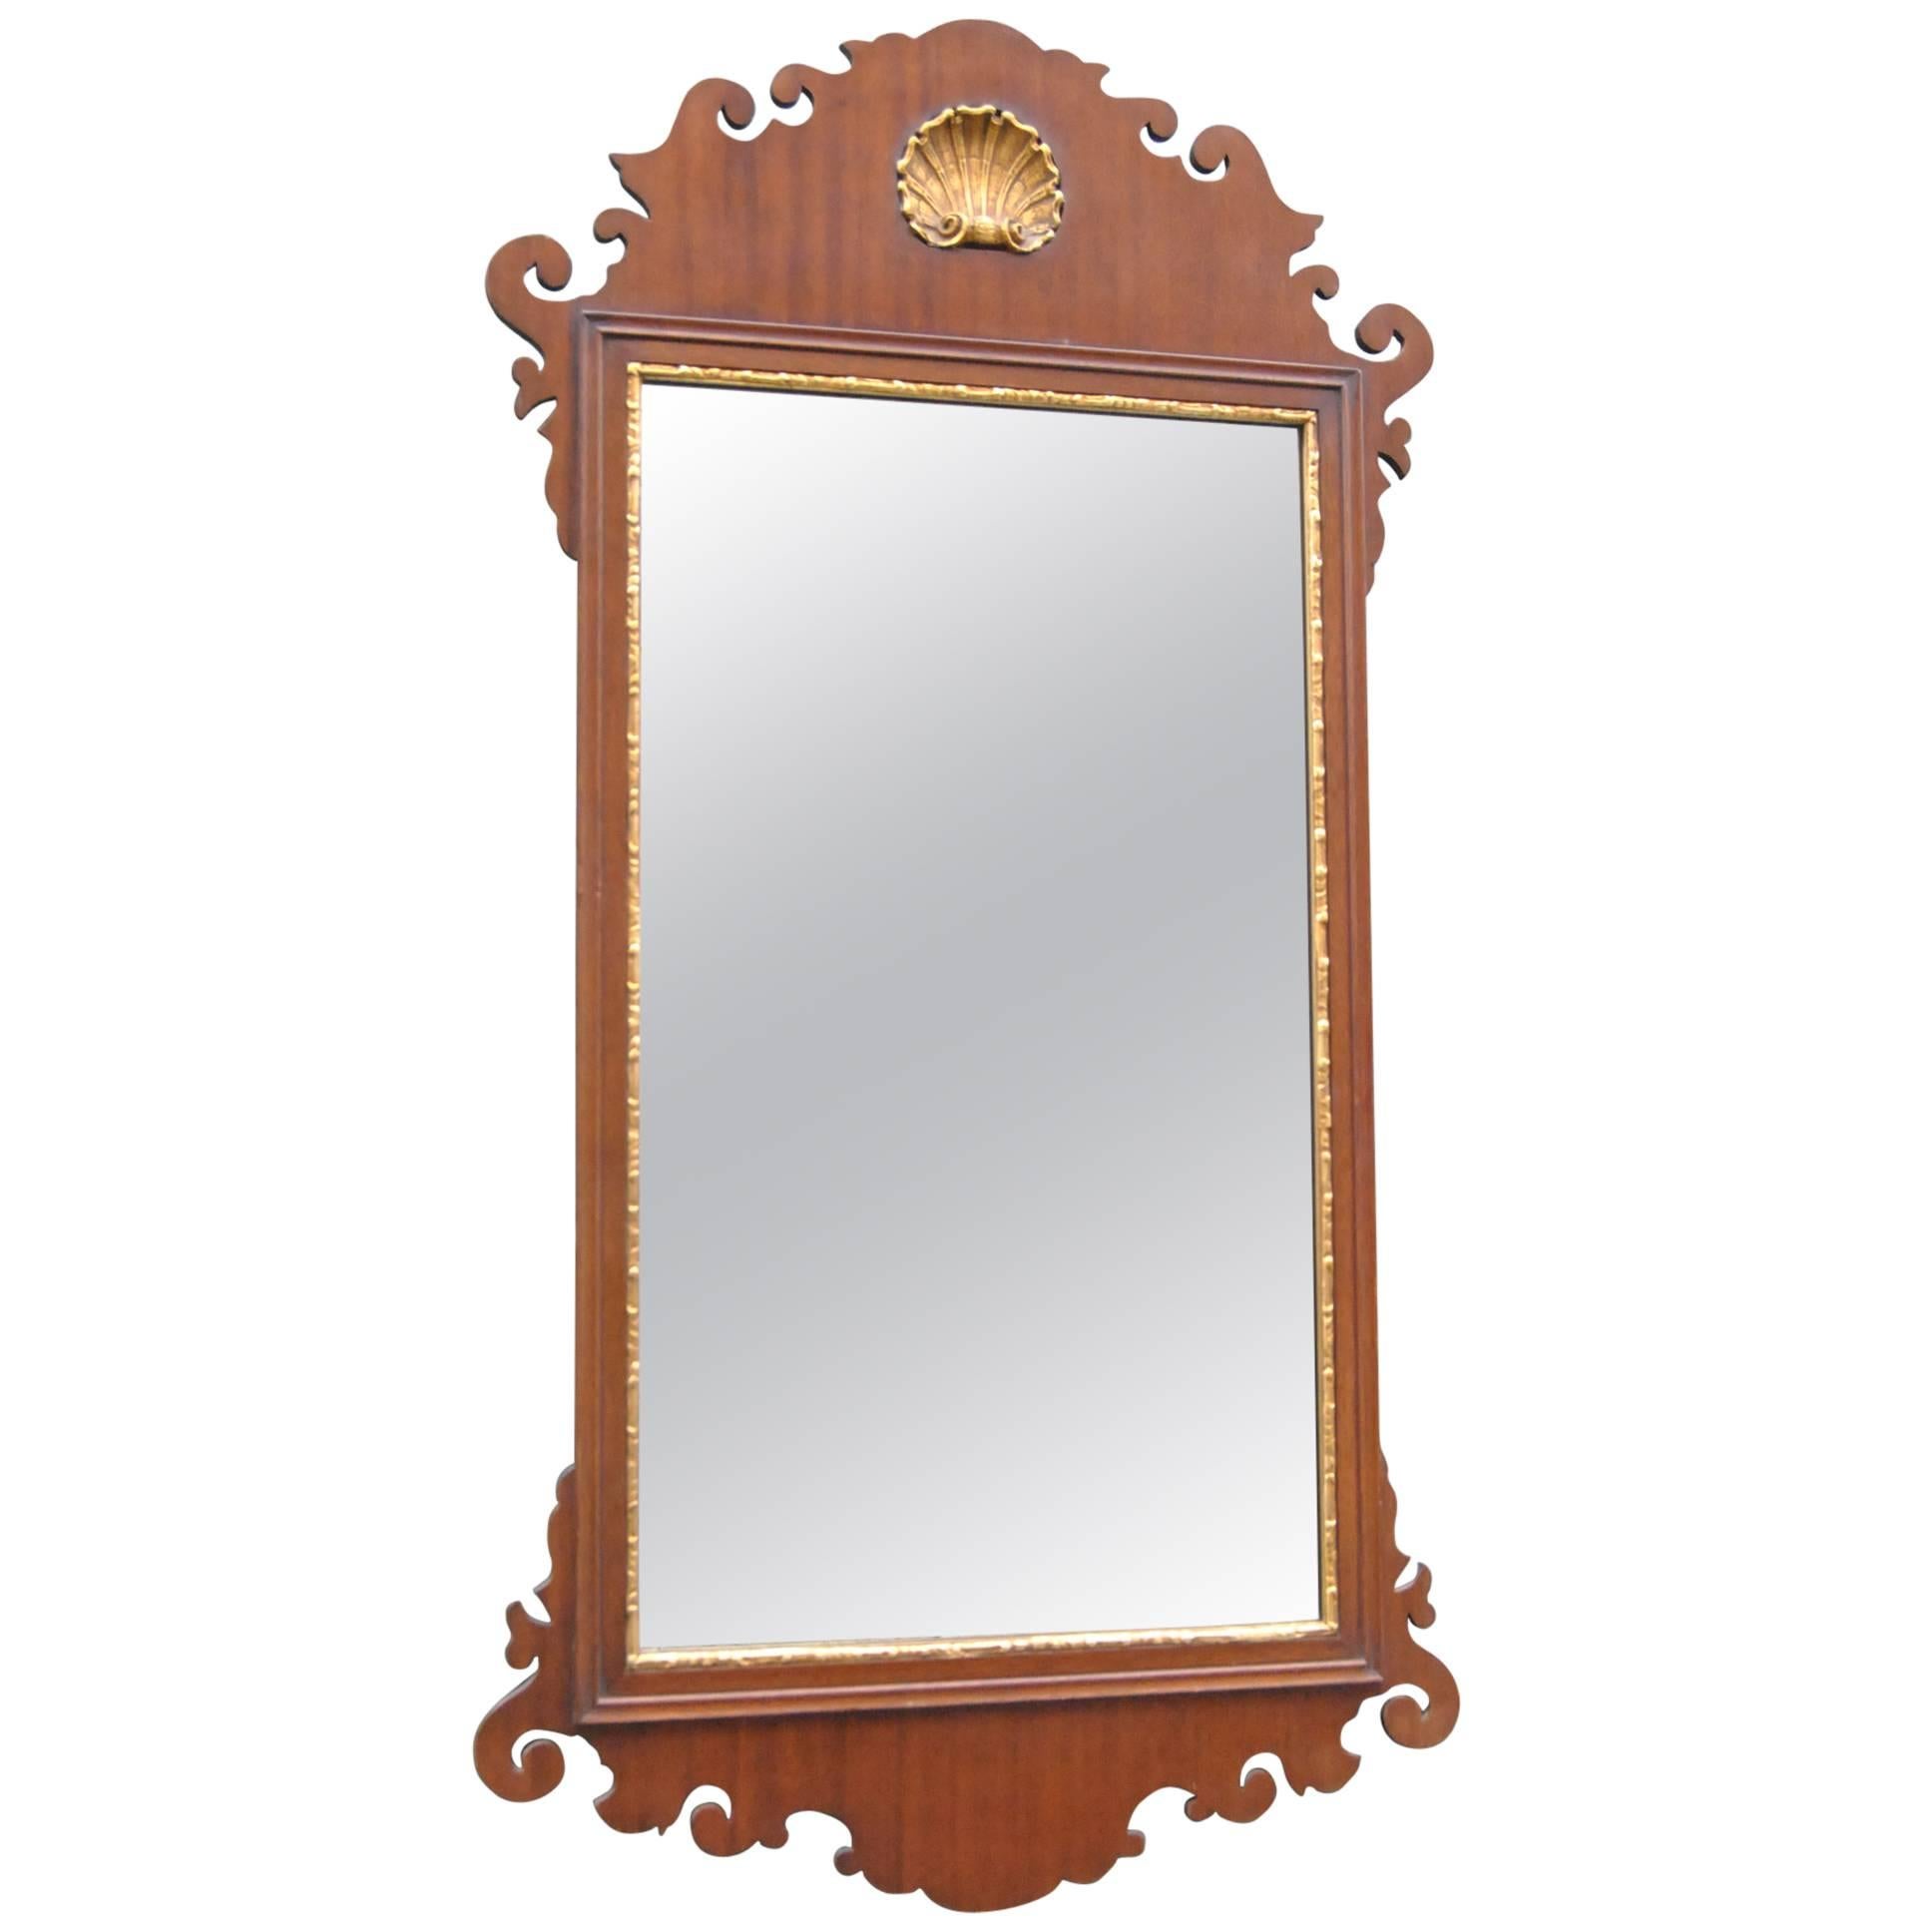 Friedman Brothers Chippendale Mahogany Mirror with Gold Shell Detail